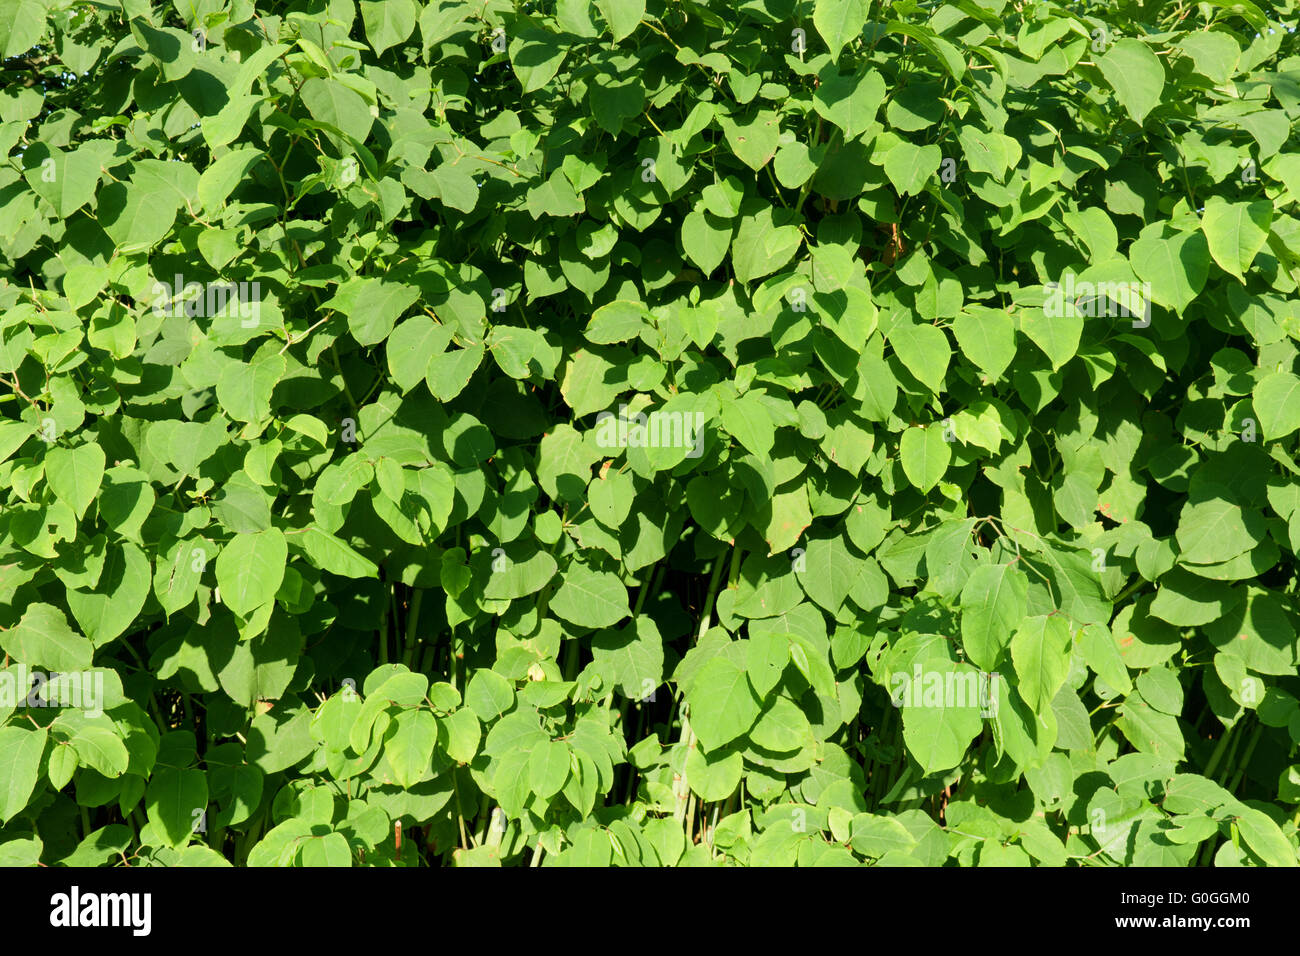 Green leaves background. Natural design pattern Stock Photo